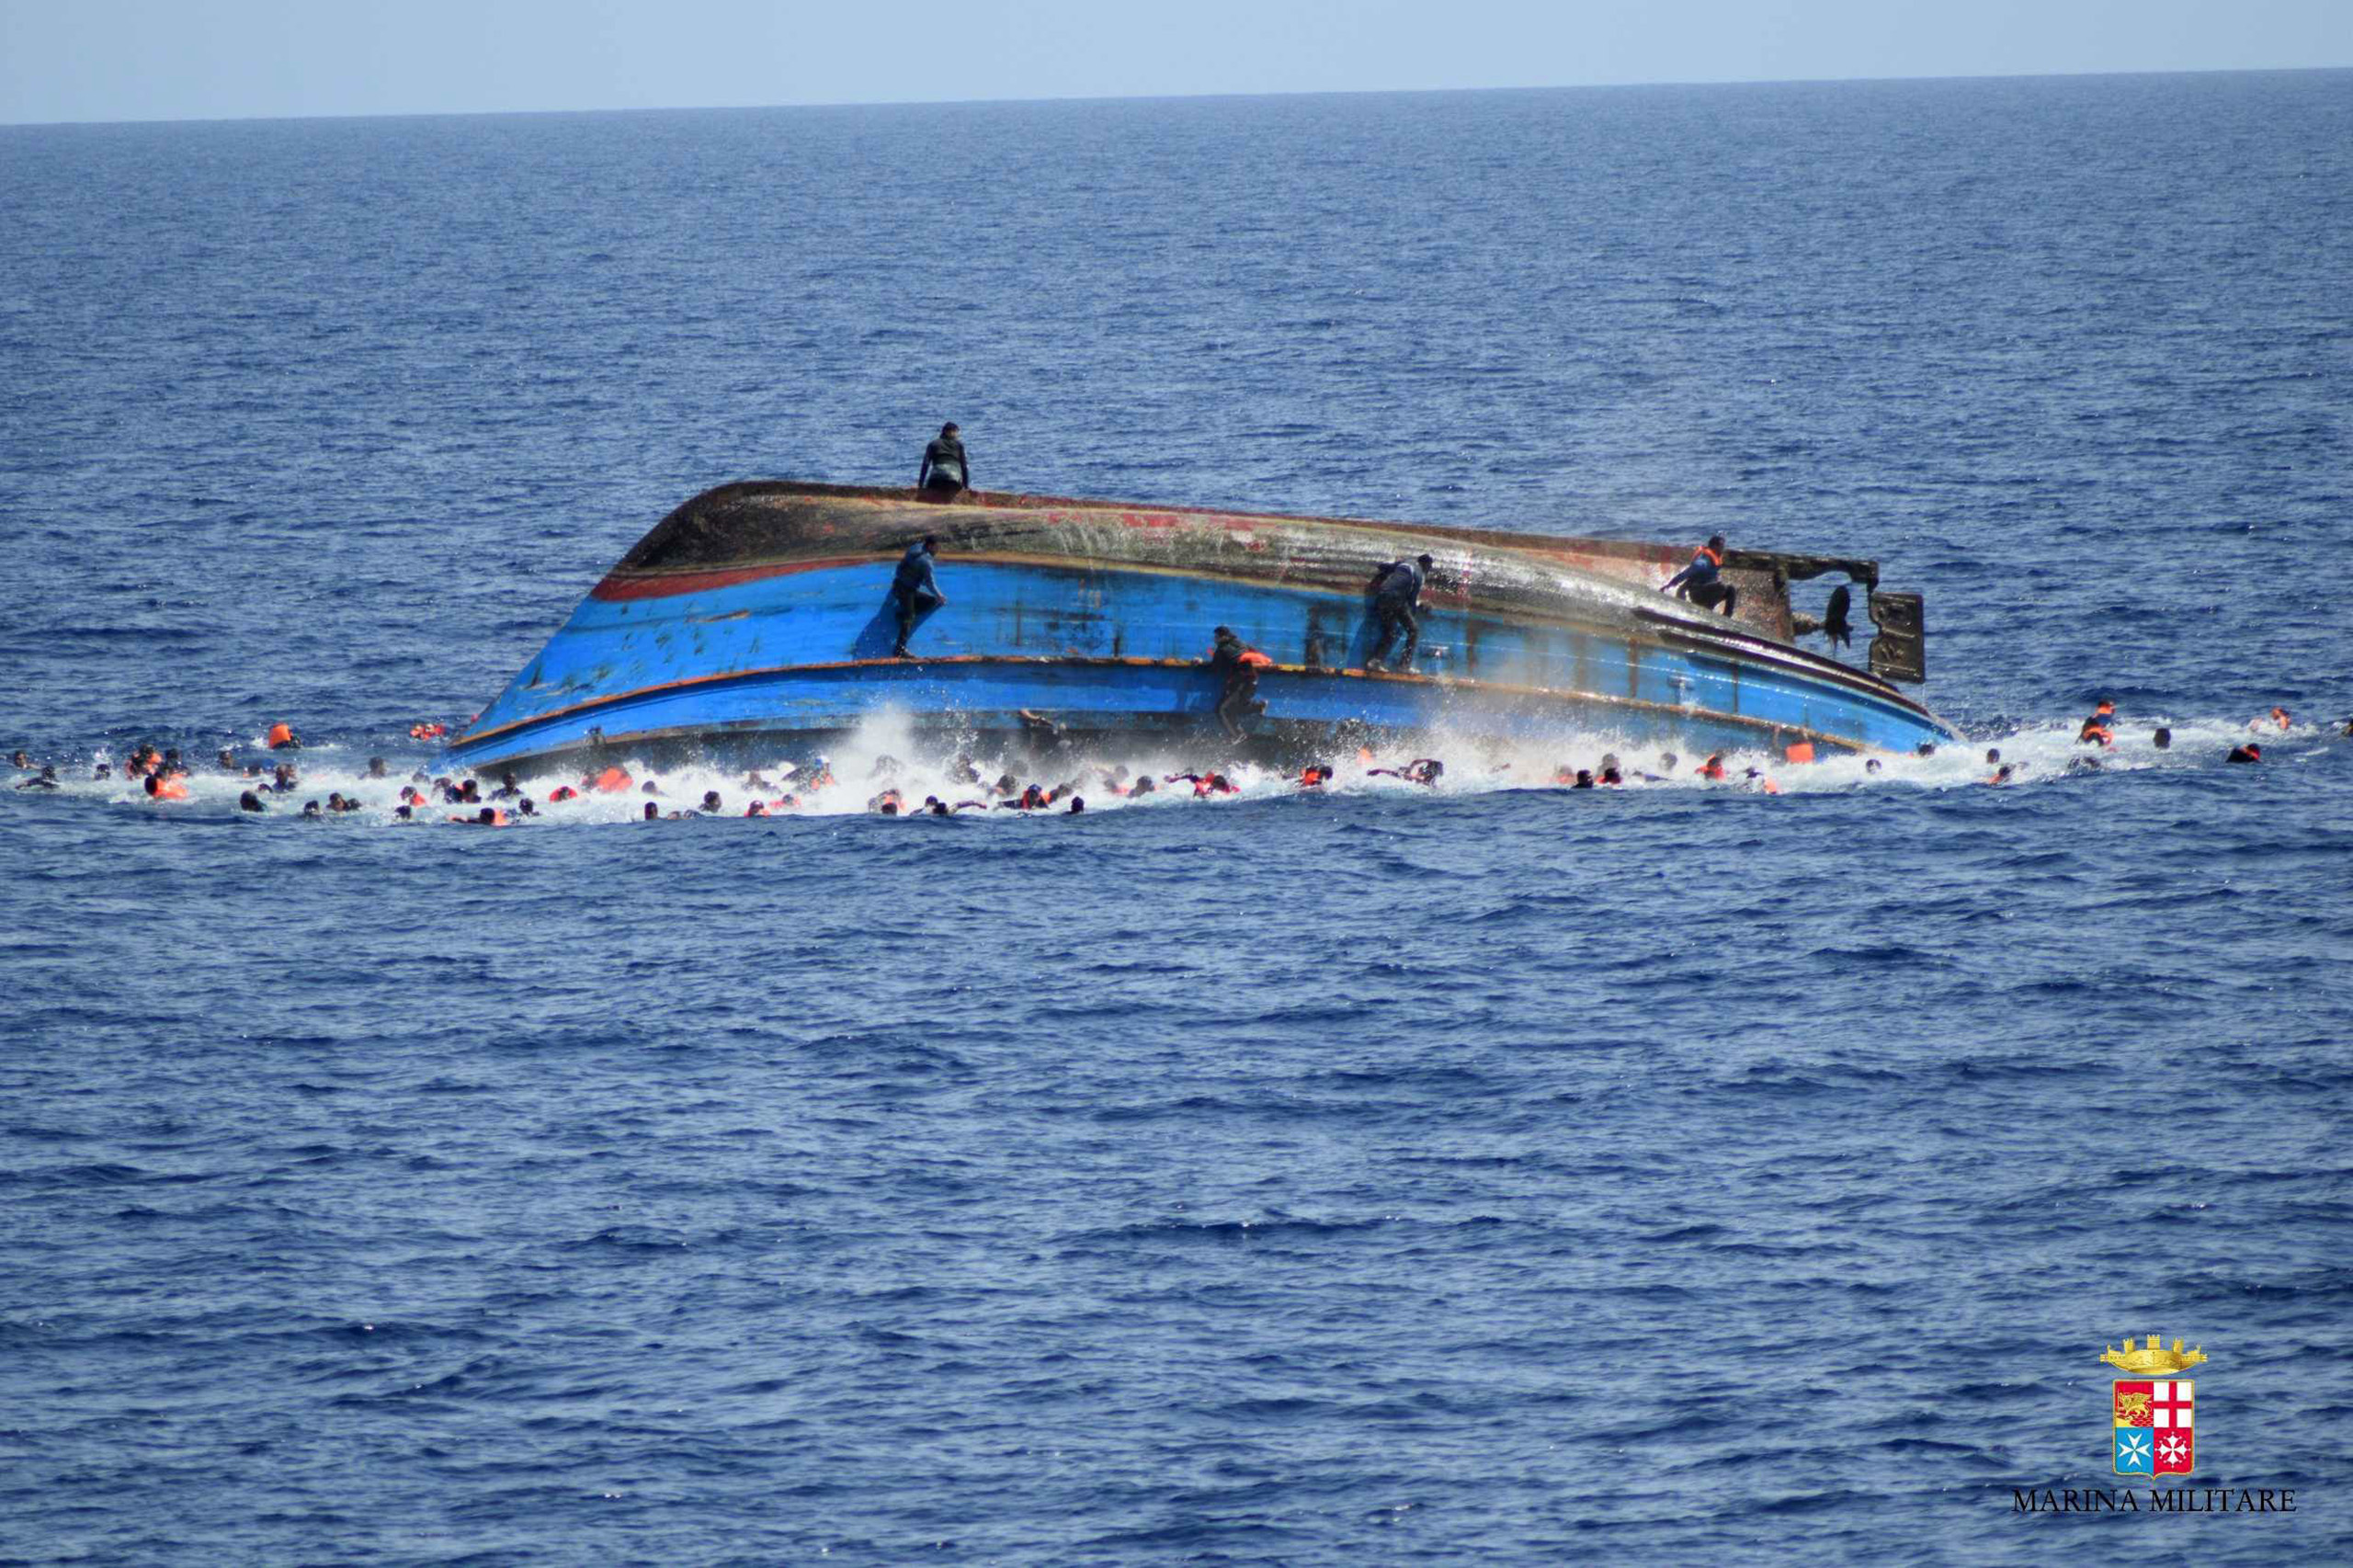 The navy said 500 people had been pulled to safety and seven bodies recovered, but rescue operations were continuing and the death toll could rise. (Italian Navy/AFP/Getty Images)